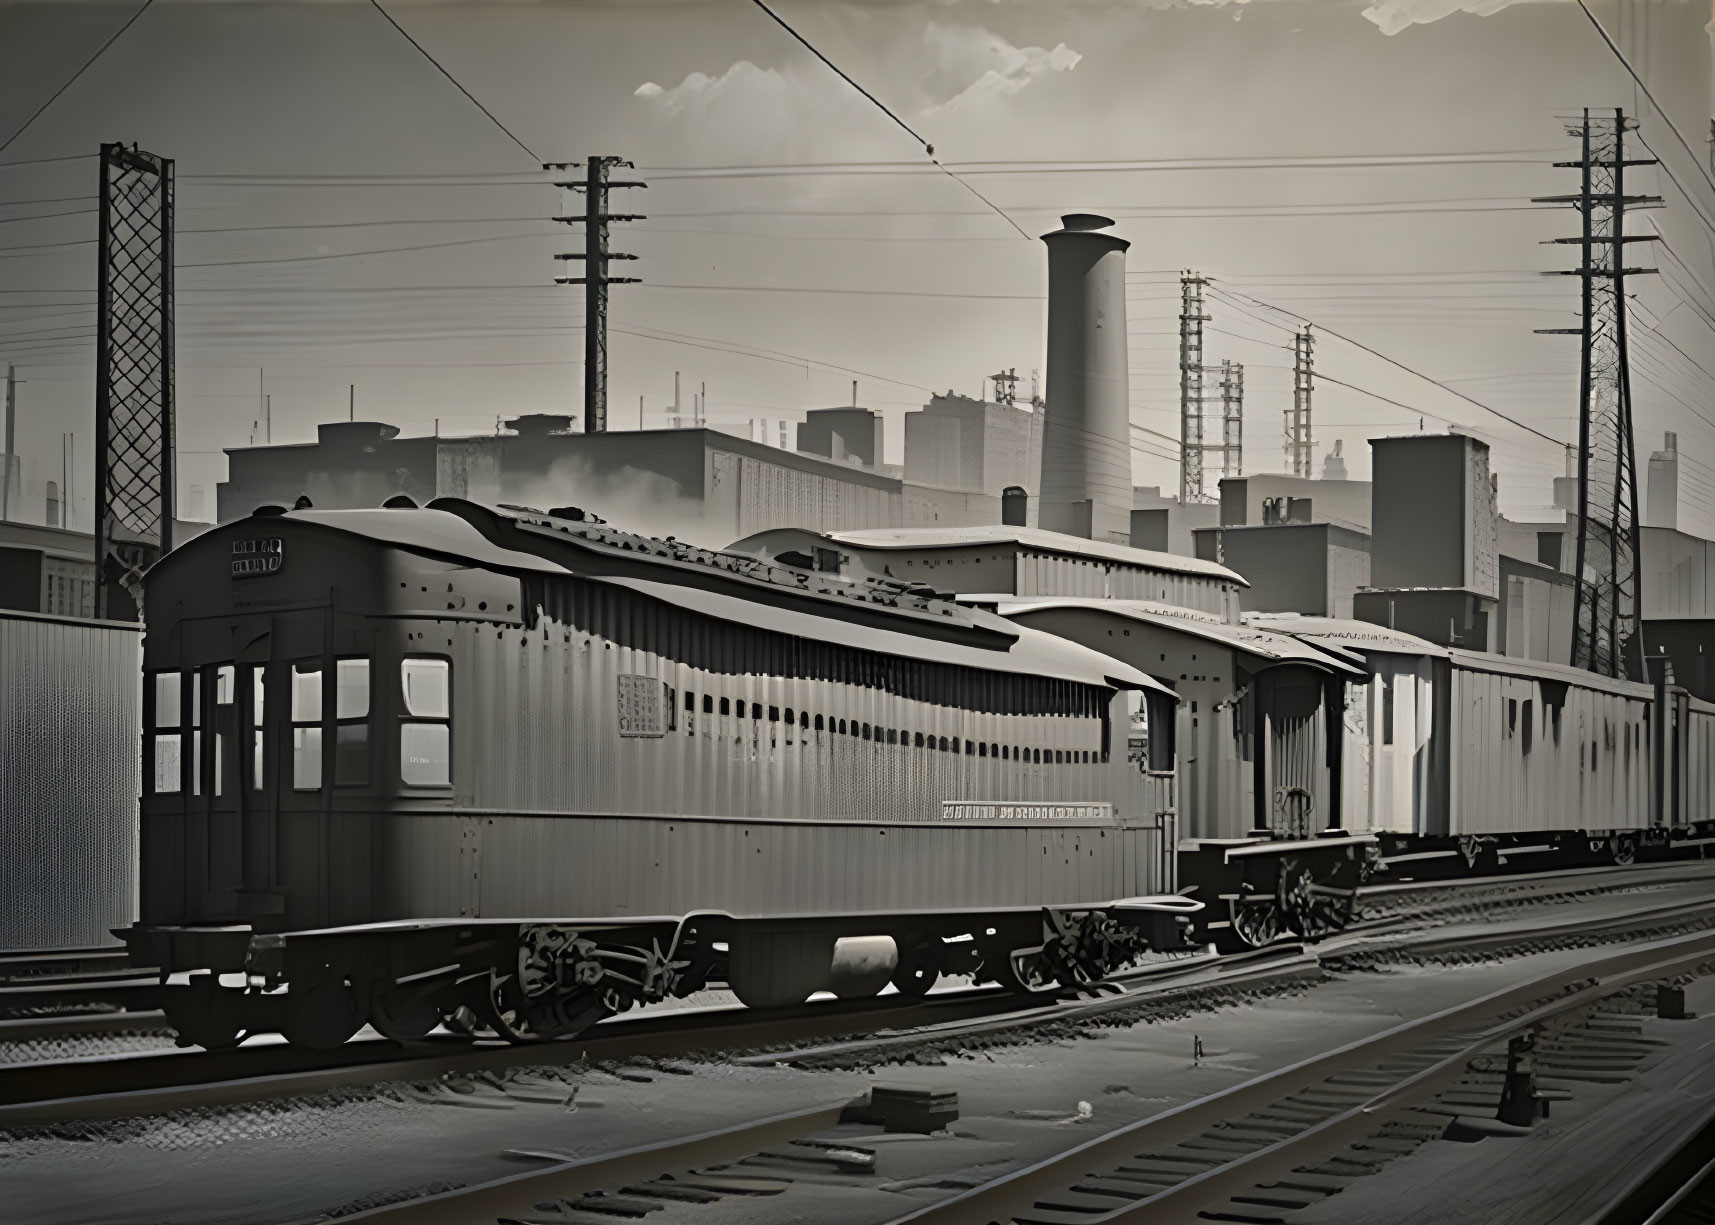 Vintage Black-and-White Image of Old-Style Passenger Train and Industrial Buildings